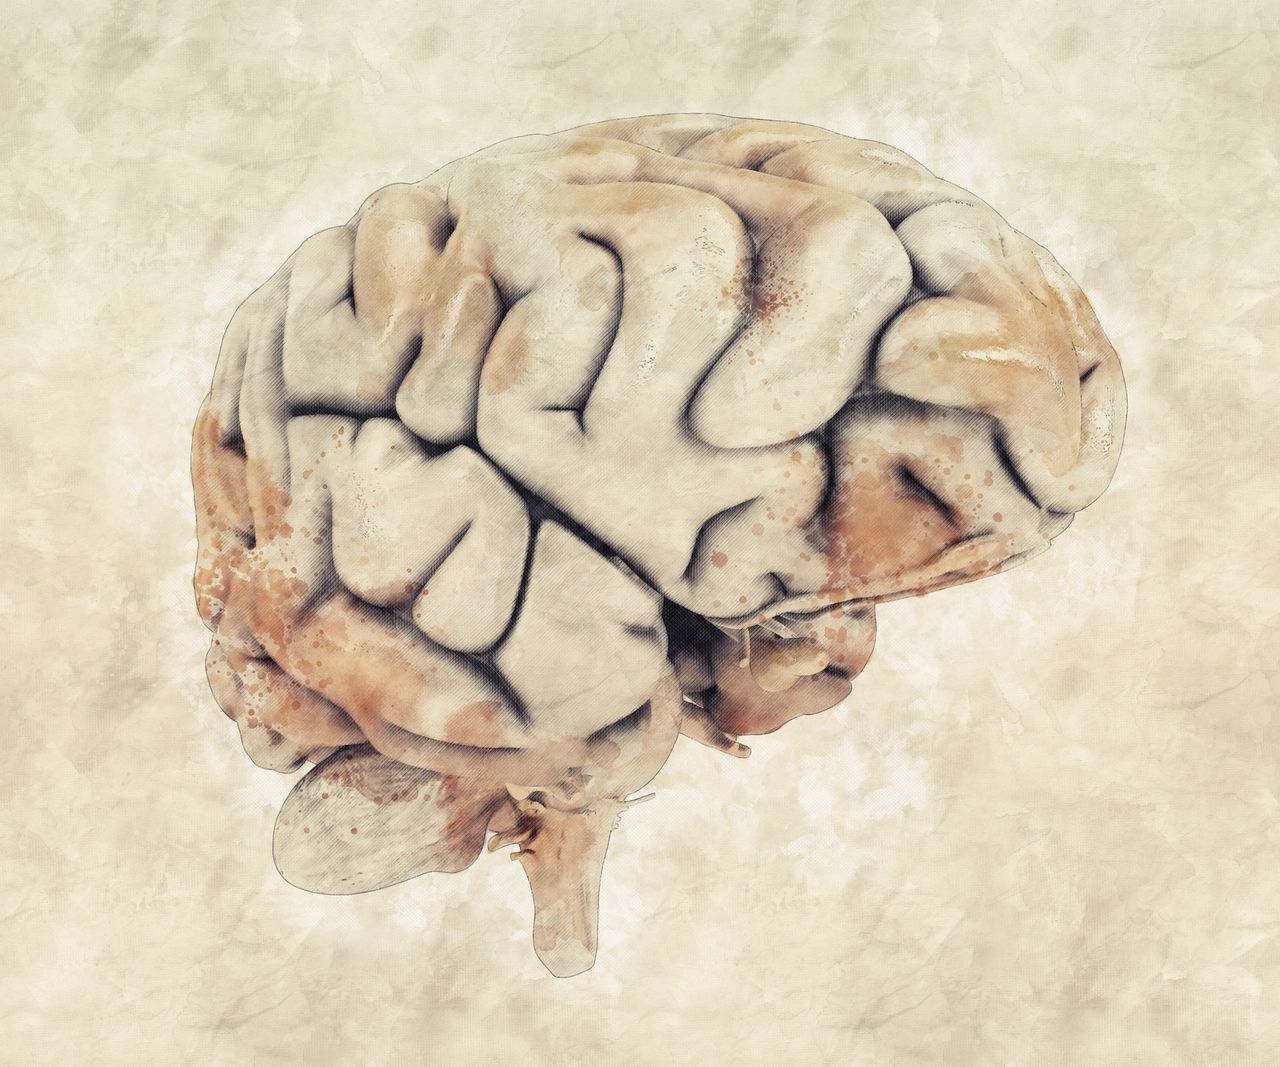 drawing of a brain